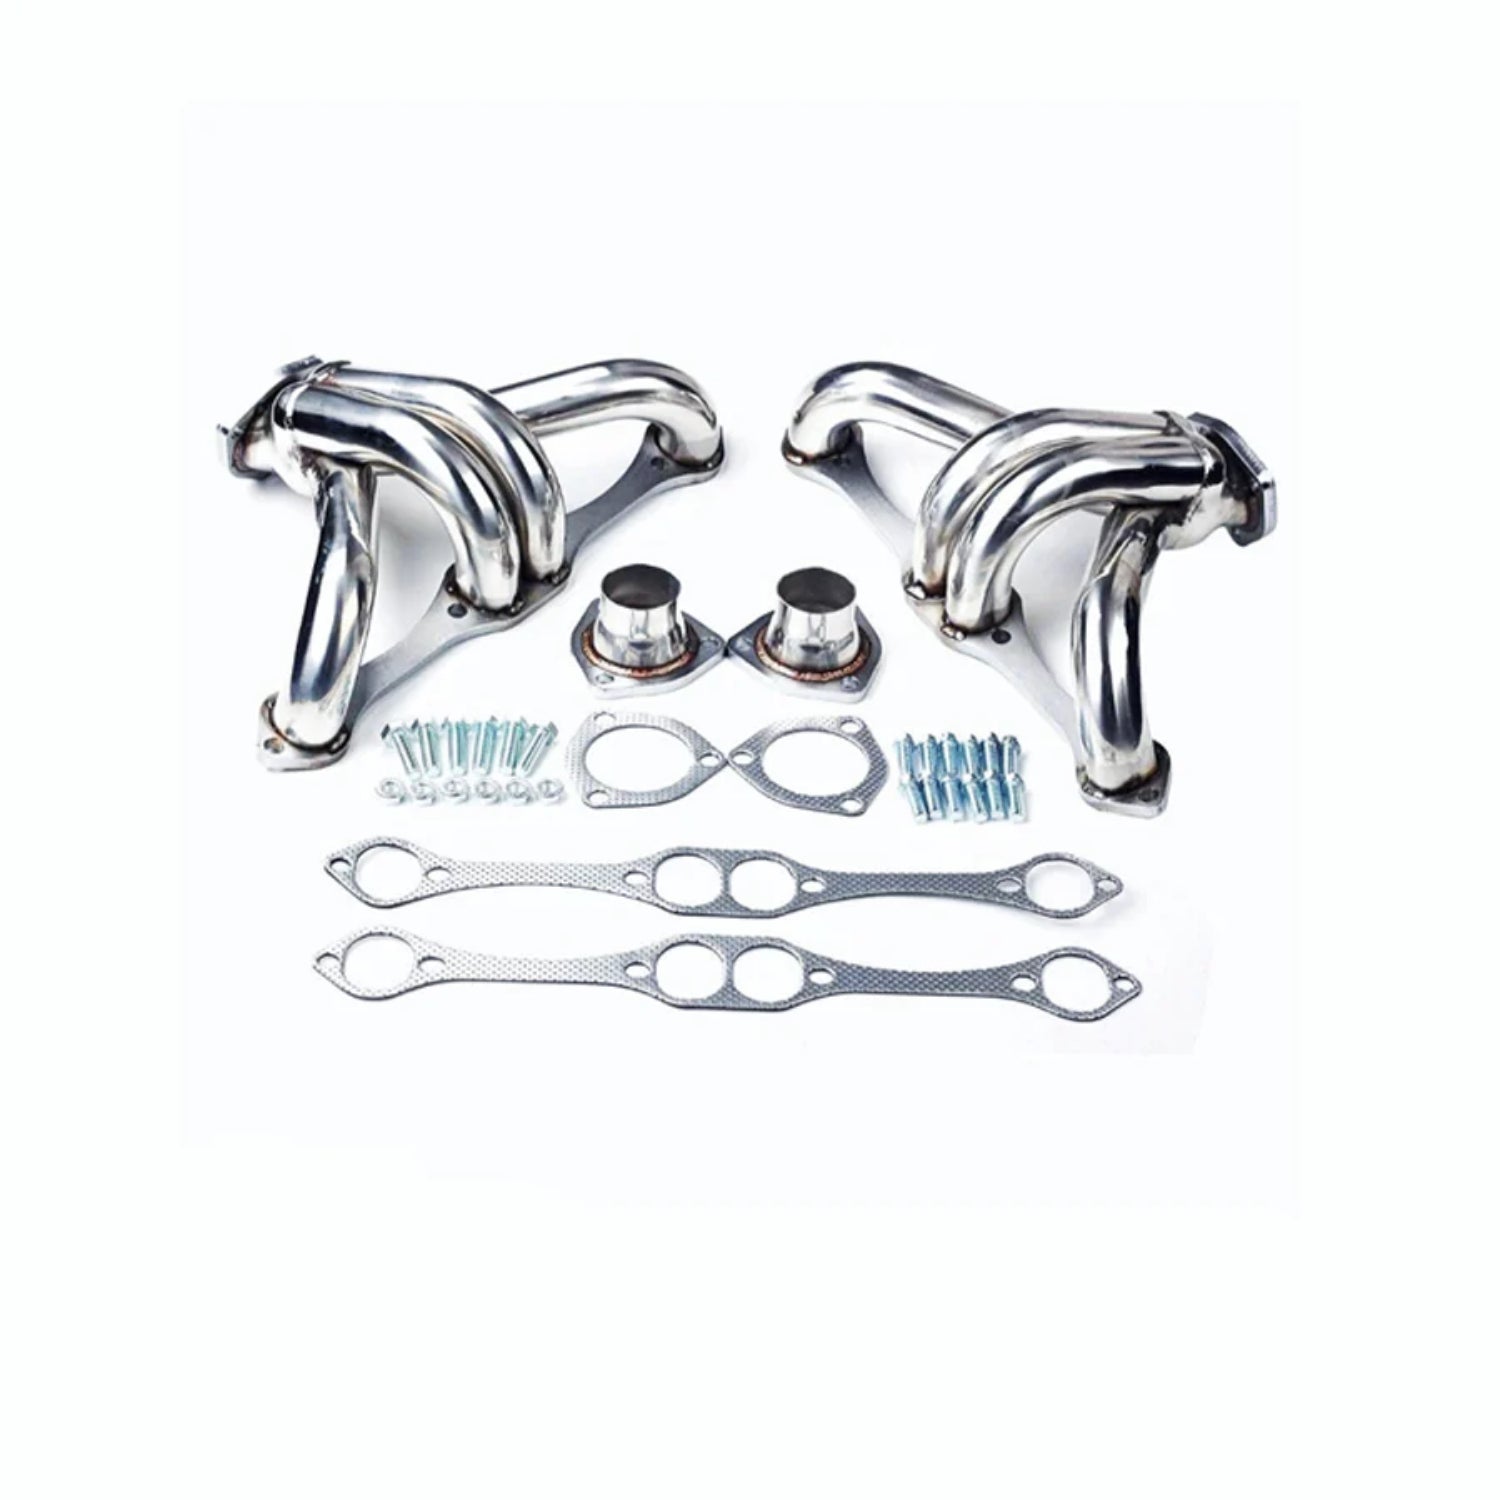 Racing Stainless Shorty Exhaust Manifold Headert for 1970-1996 Chevy Small Block 283|305|327|350|400 V8 Engines